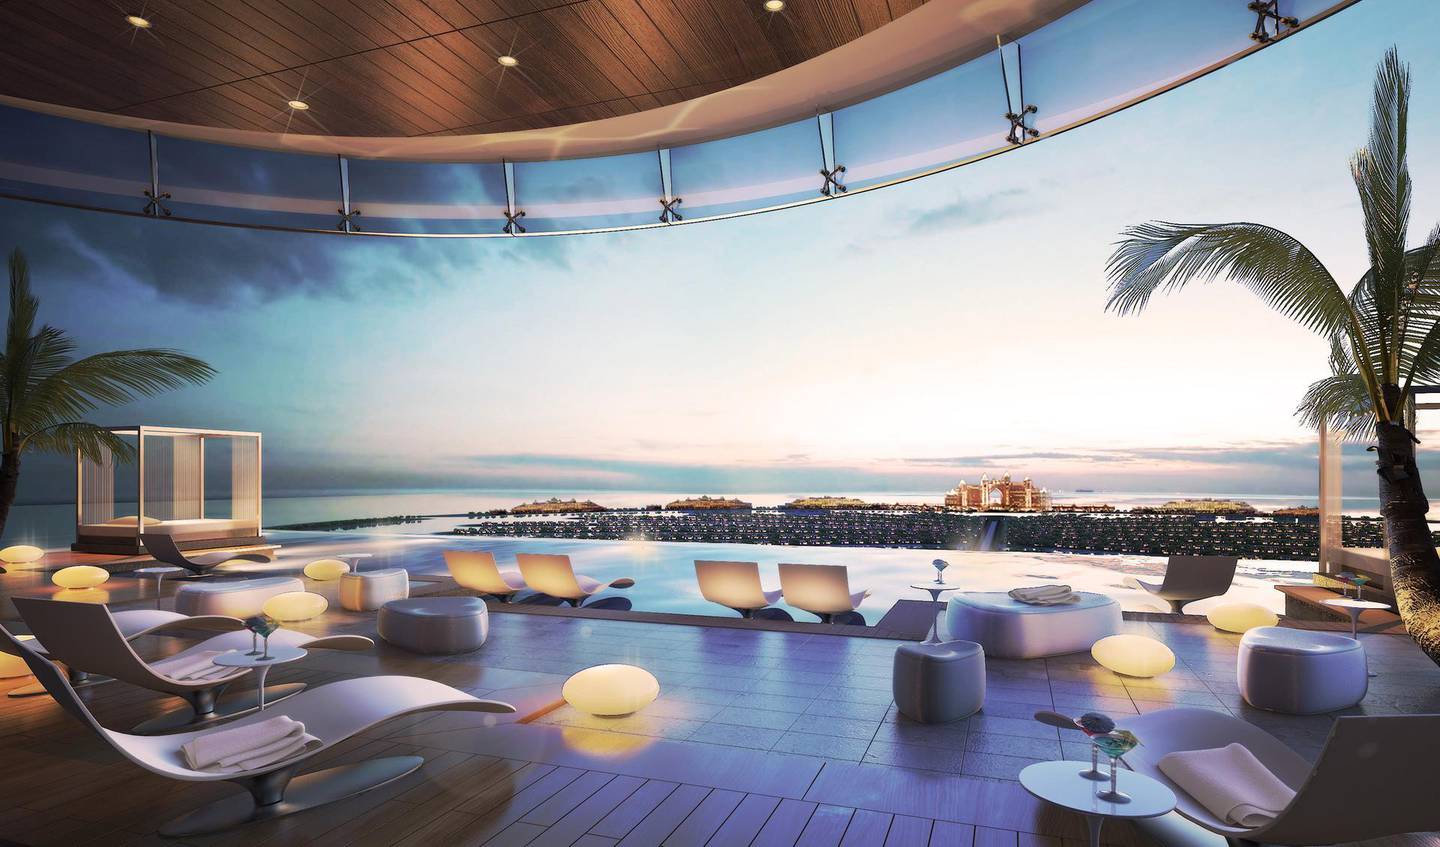 At 210 metres above ground, it's set to be one of the highest infinity pools in the world. At Courtesy Nakheel